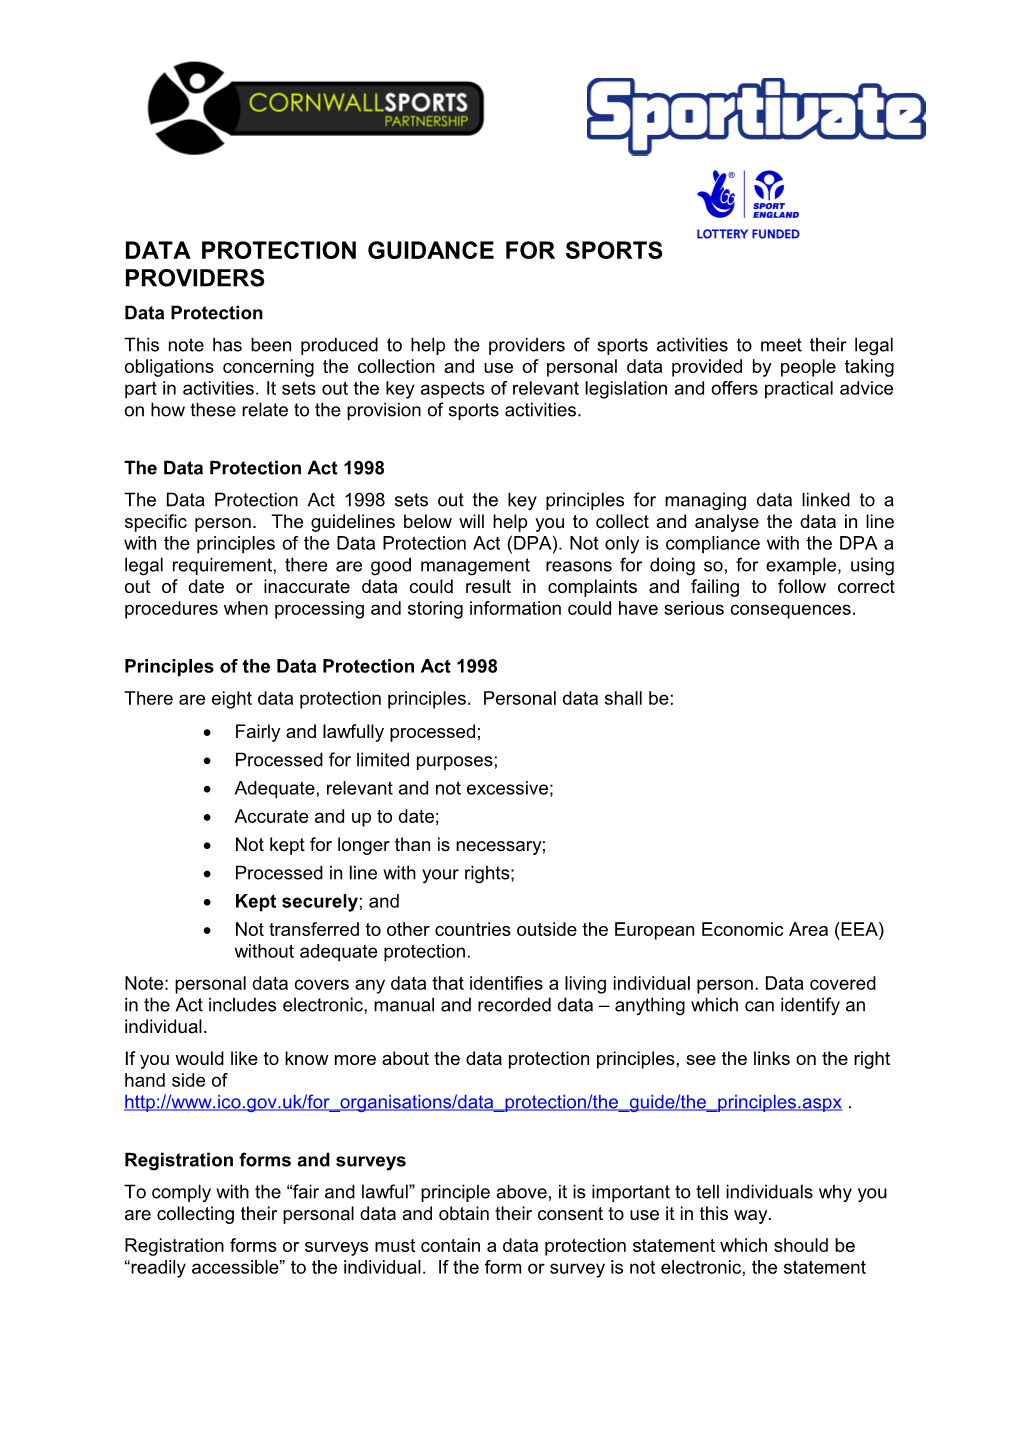 Data Protection Guidance for Sports Providers